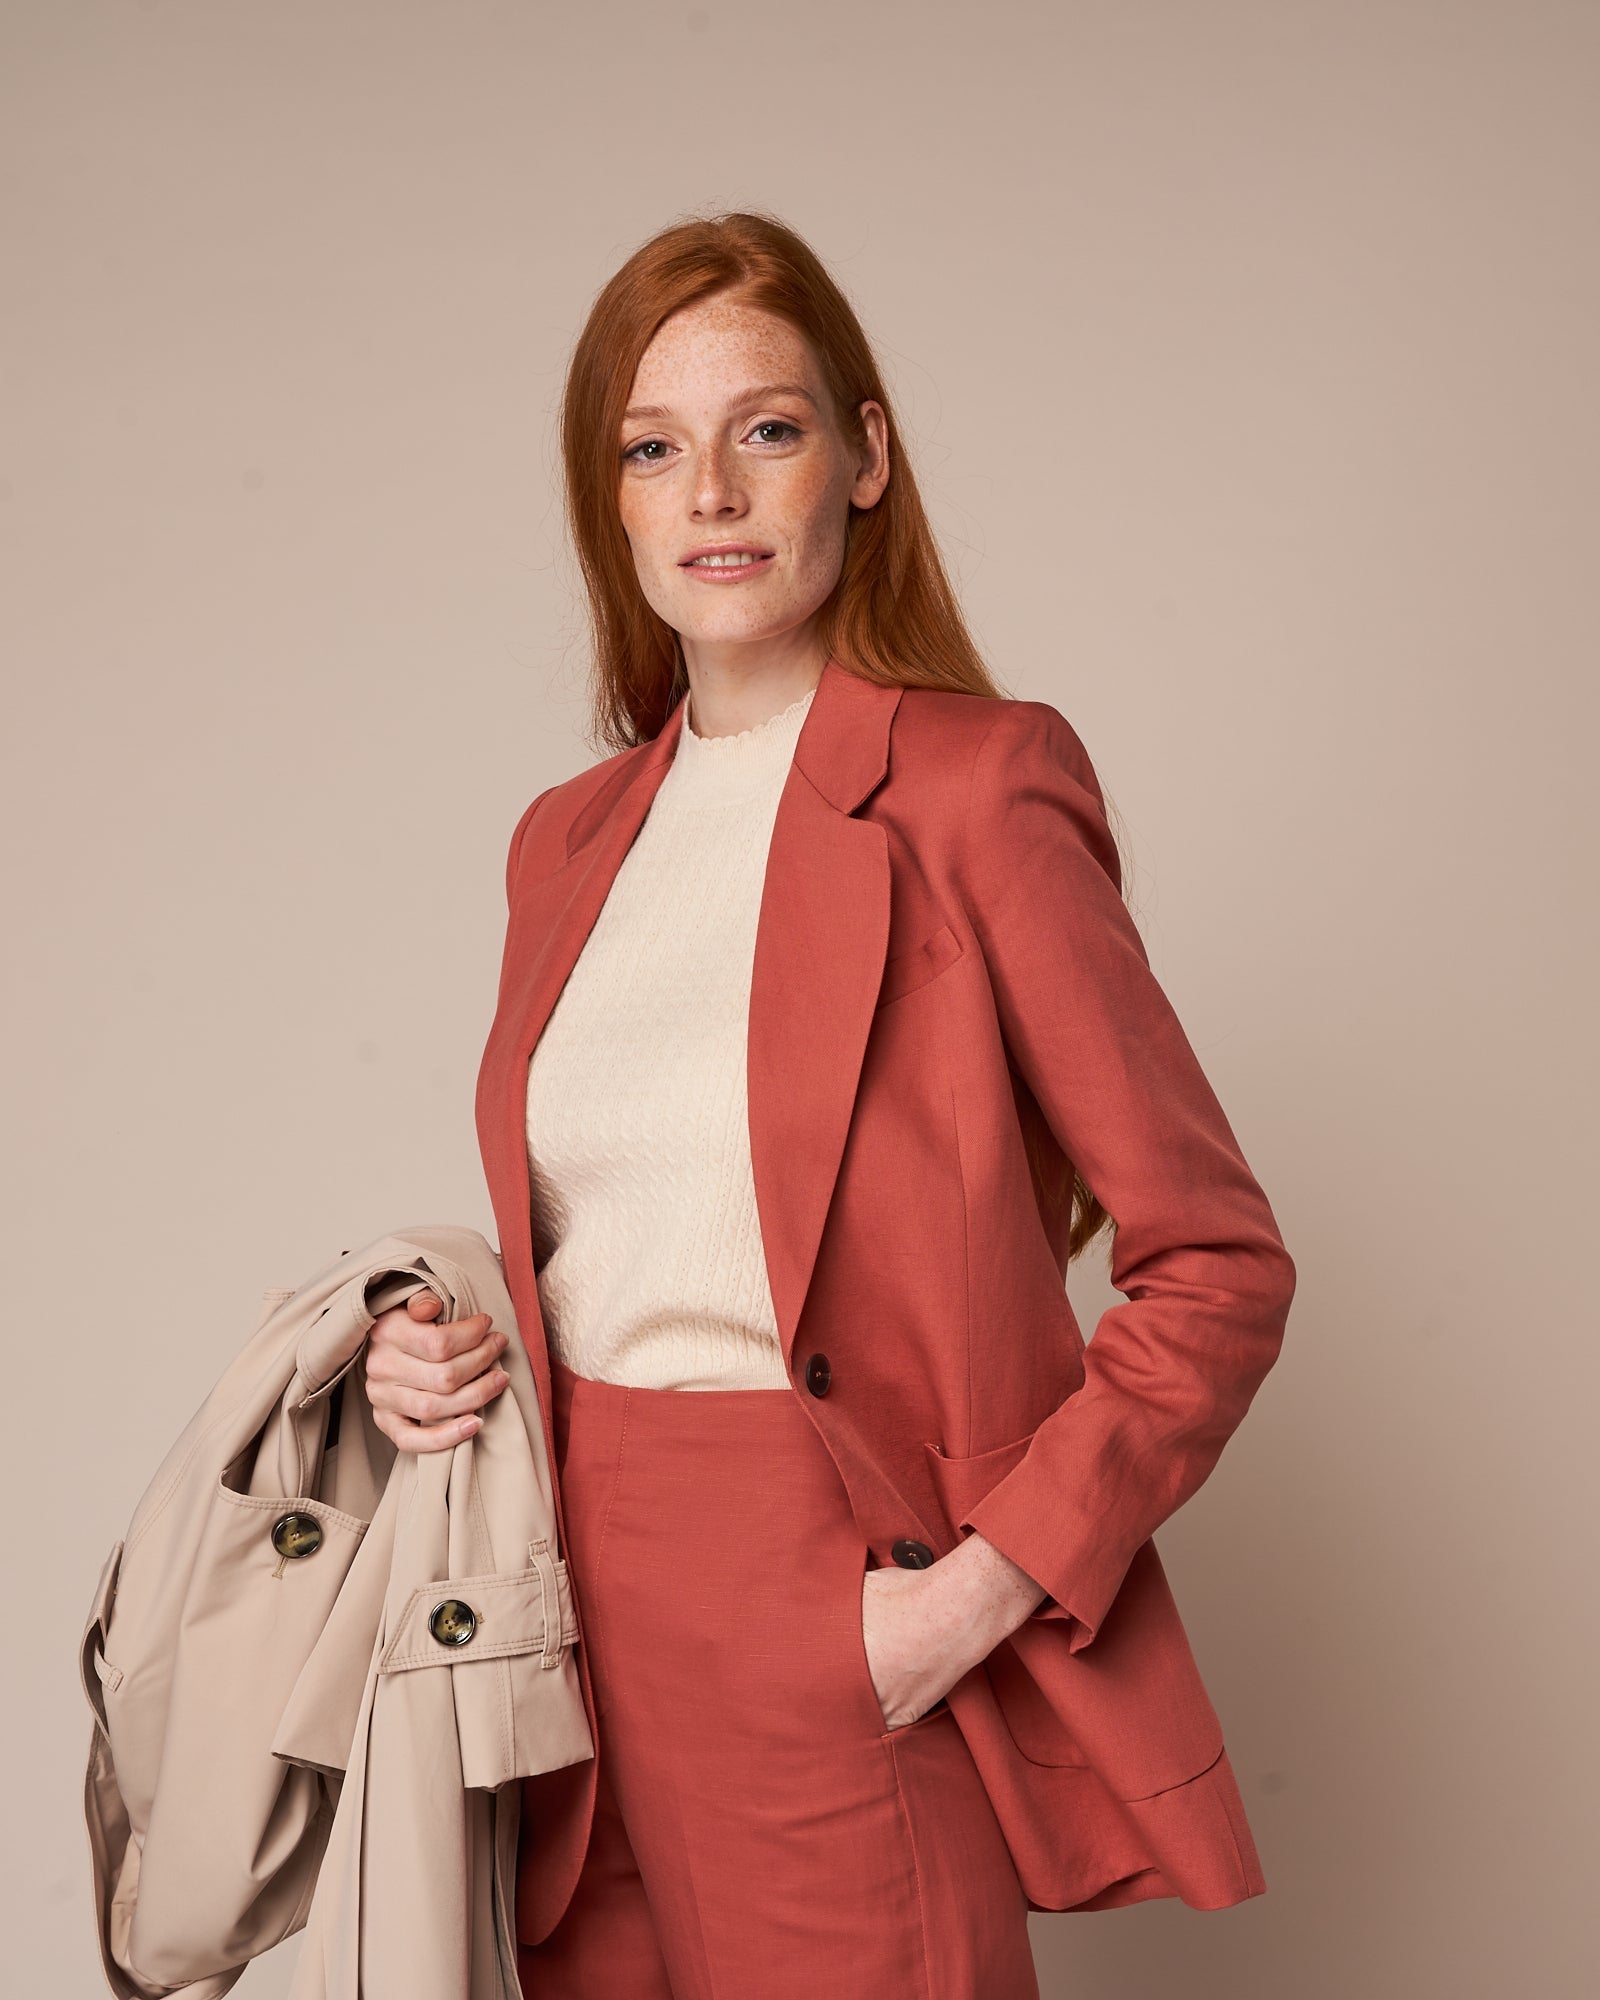 Save up to 80% on Women's Blazers | Pre-Loved Clothing Sale | Koop